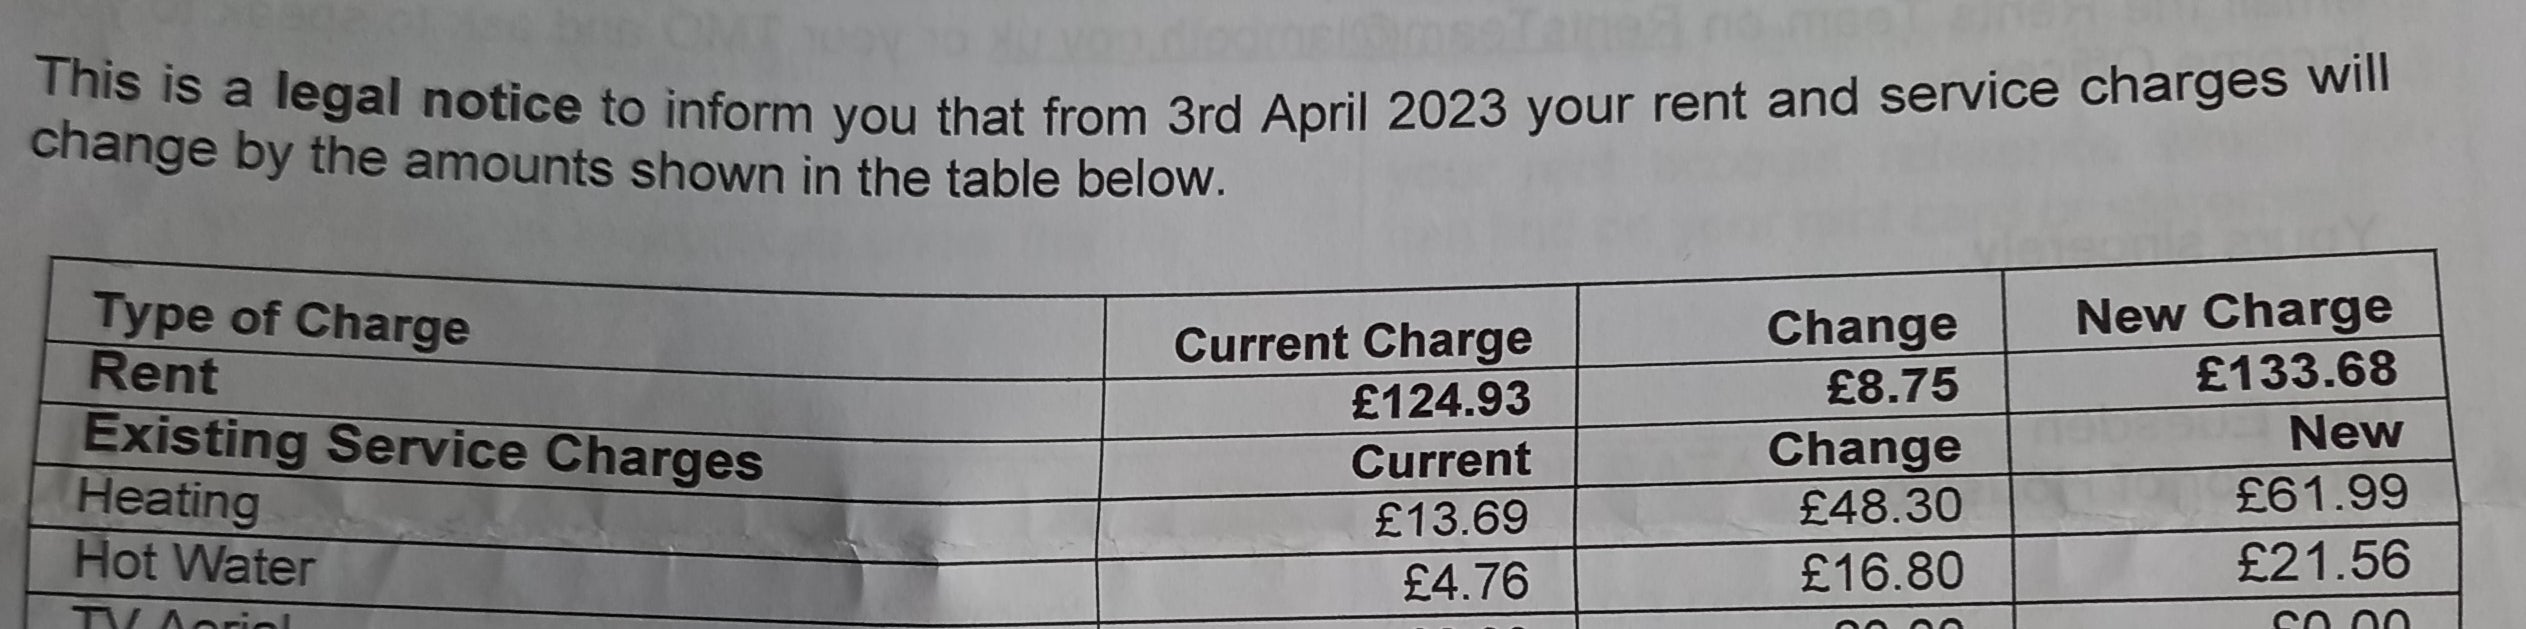 Kirsty saw her heating bill go from £13.69 to £61.99 a week in April 2023